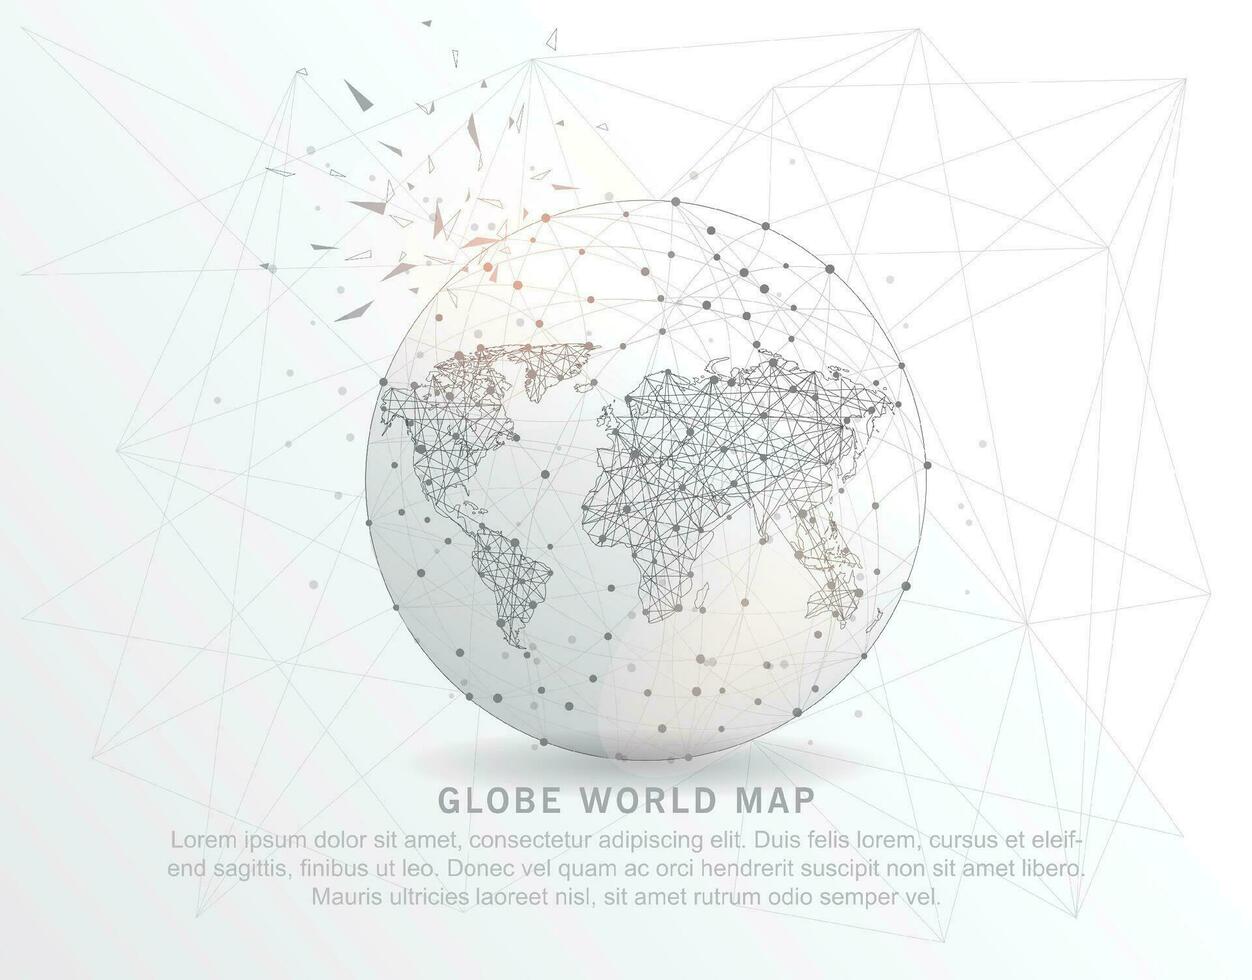 Globe world map shape point, line and composition digitally drawn in the form of broken a part triangle shape and scattered dots. vector